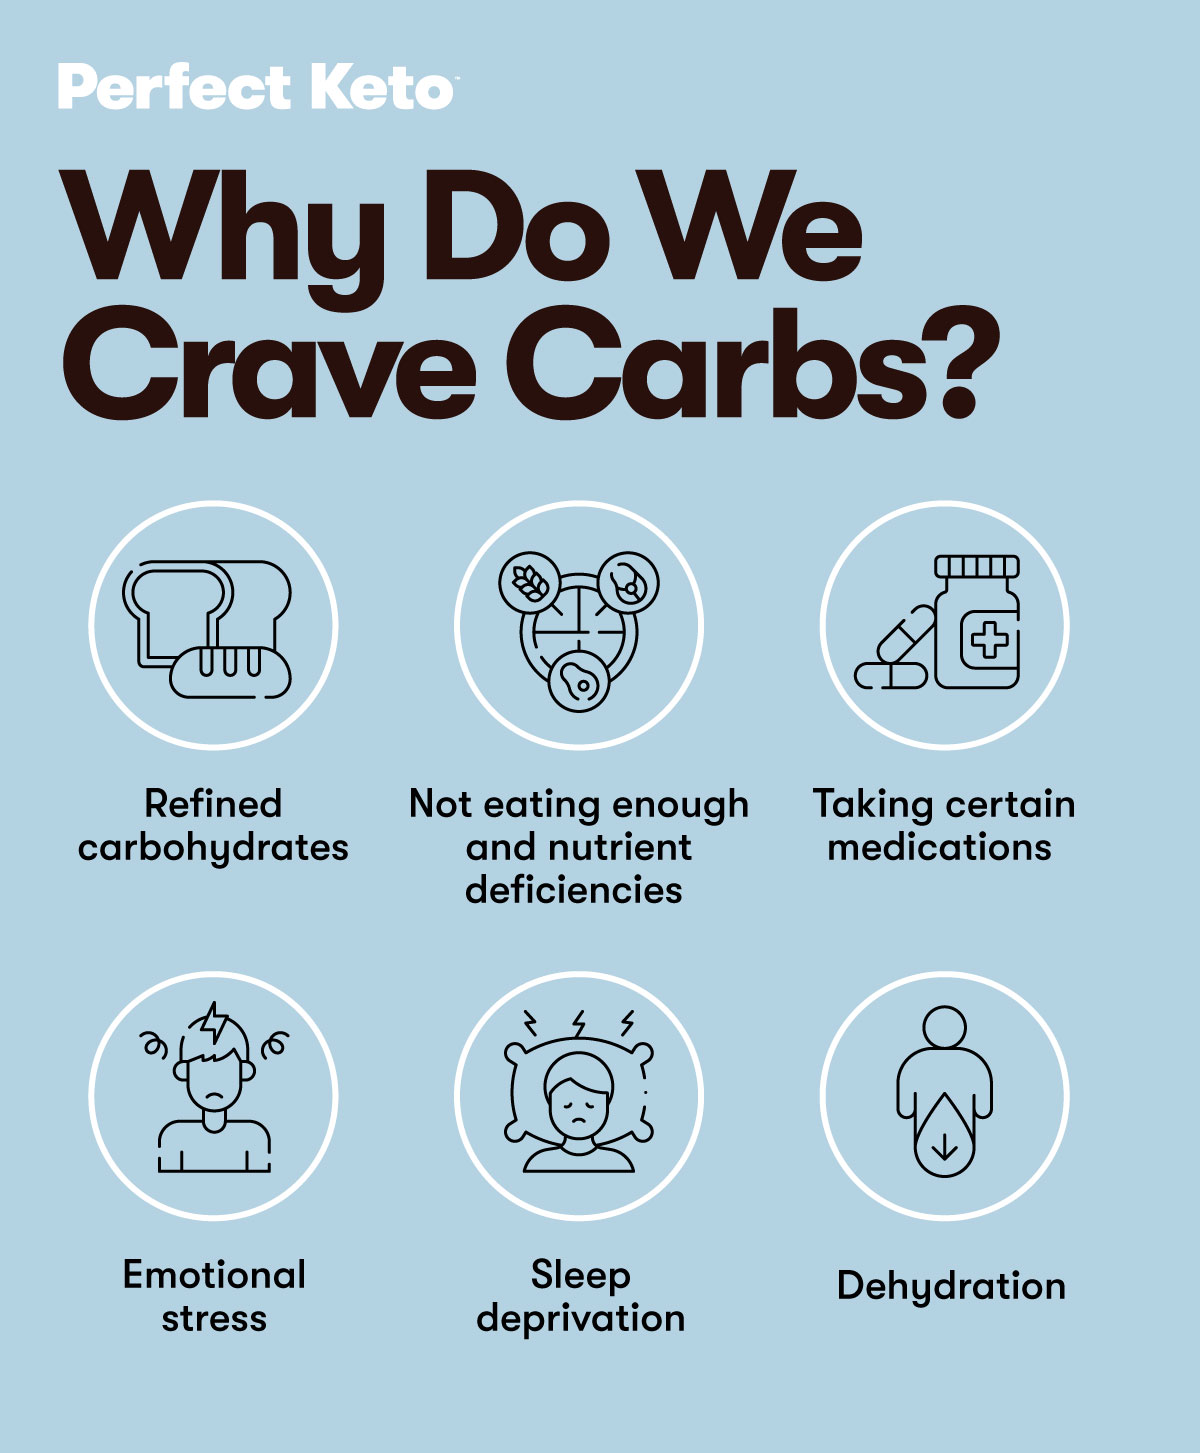 Carbohydrate craving triggers